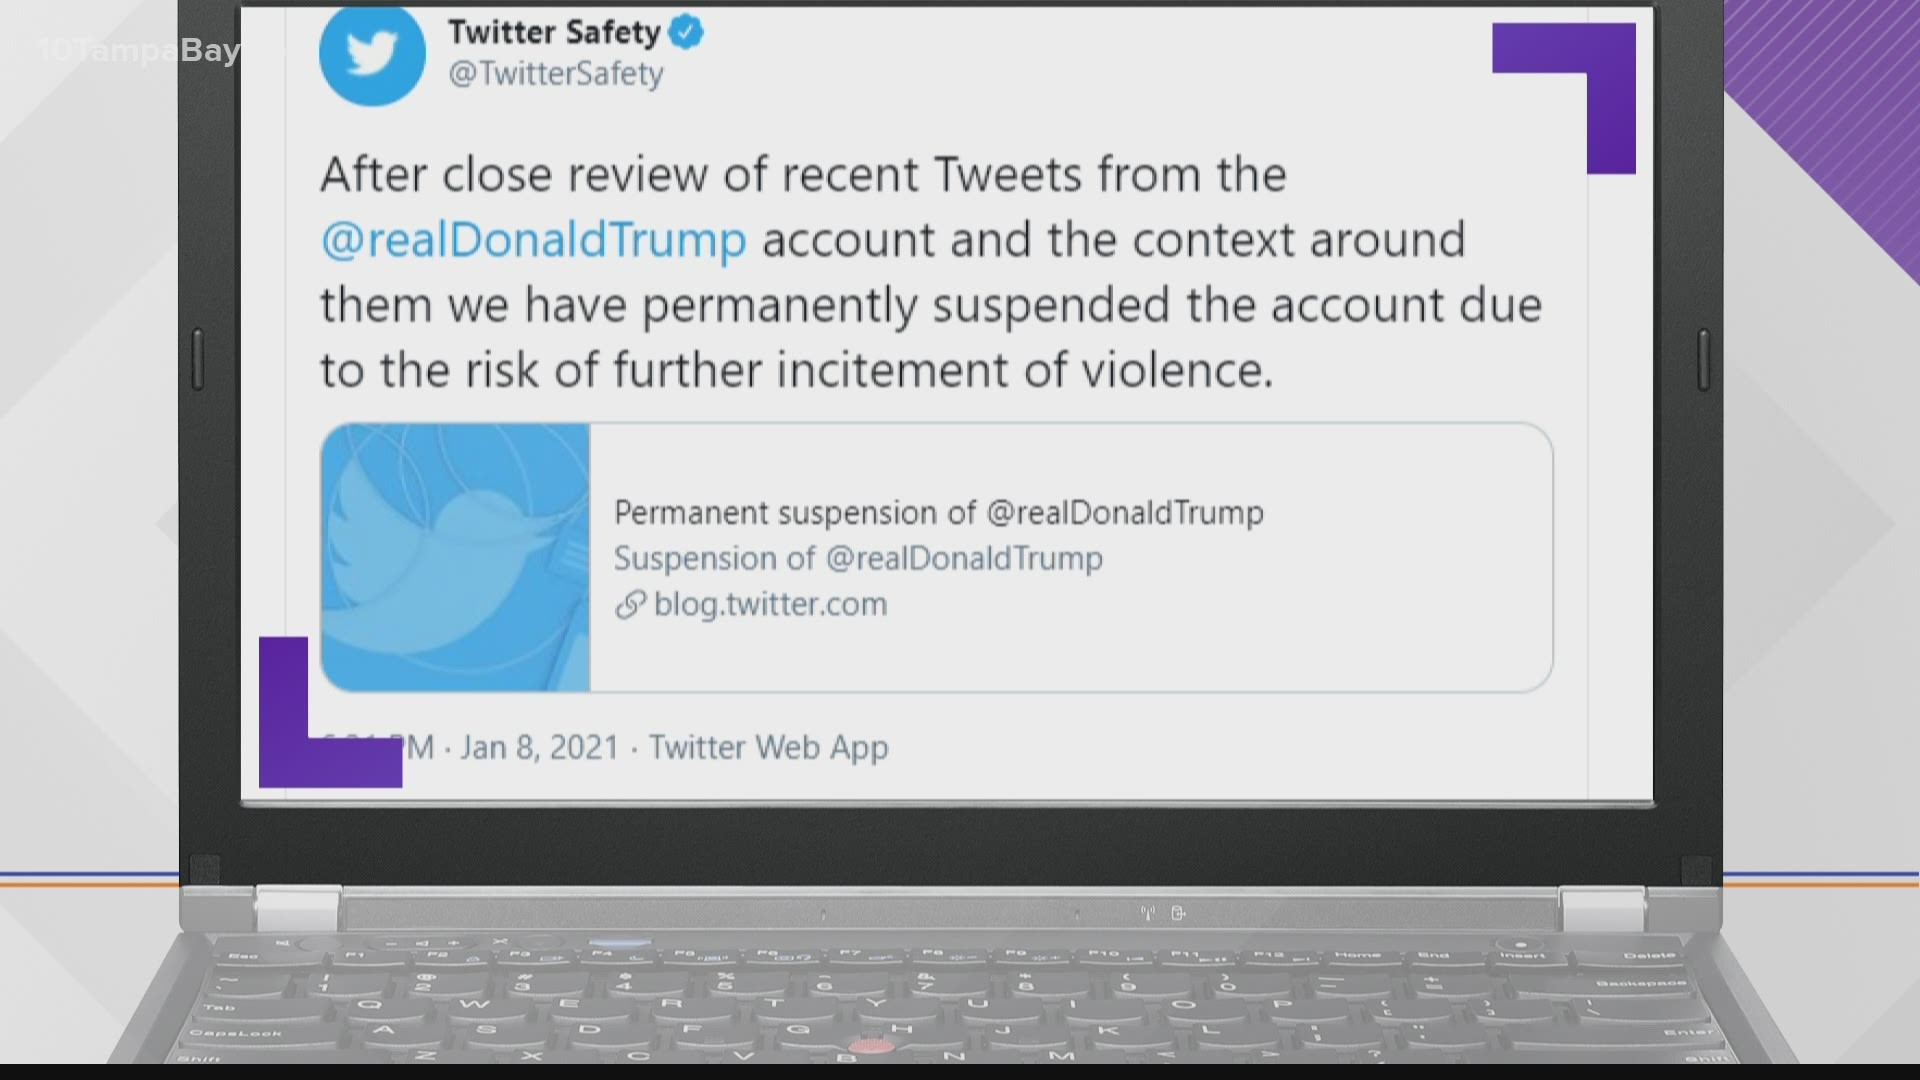 'Due to the risk of further incitement of violence,' Twitter said it has suspended President Trump's personal account.